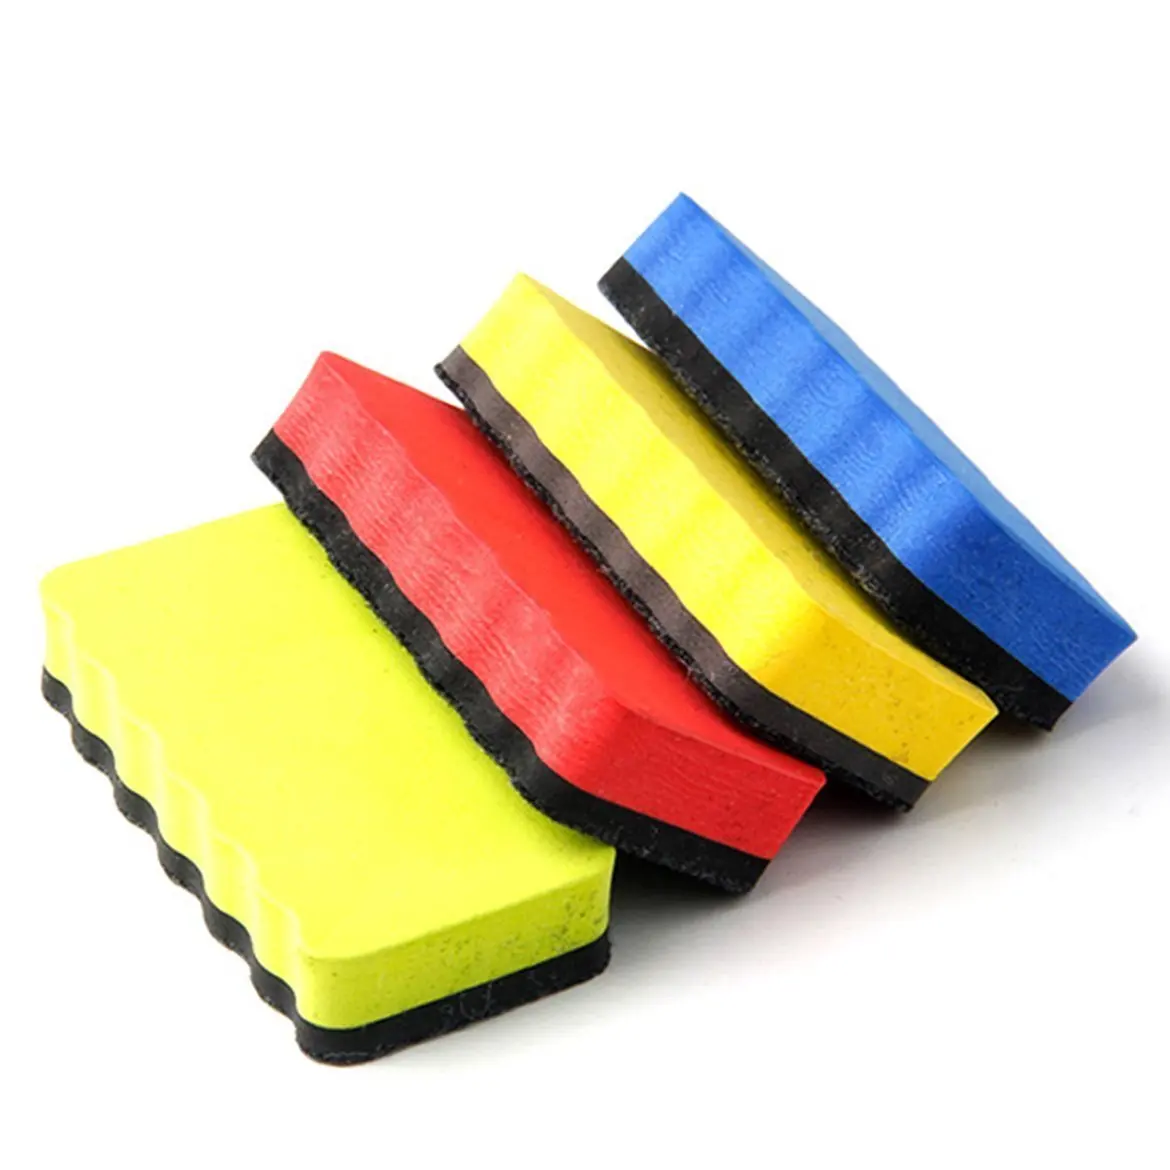 

Whiteboard Erasers Space Saving Compact Size Multicolored Design Chalk Brush Office Accessories Practical School Supplies Type 1